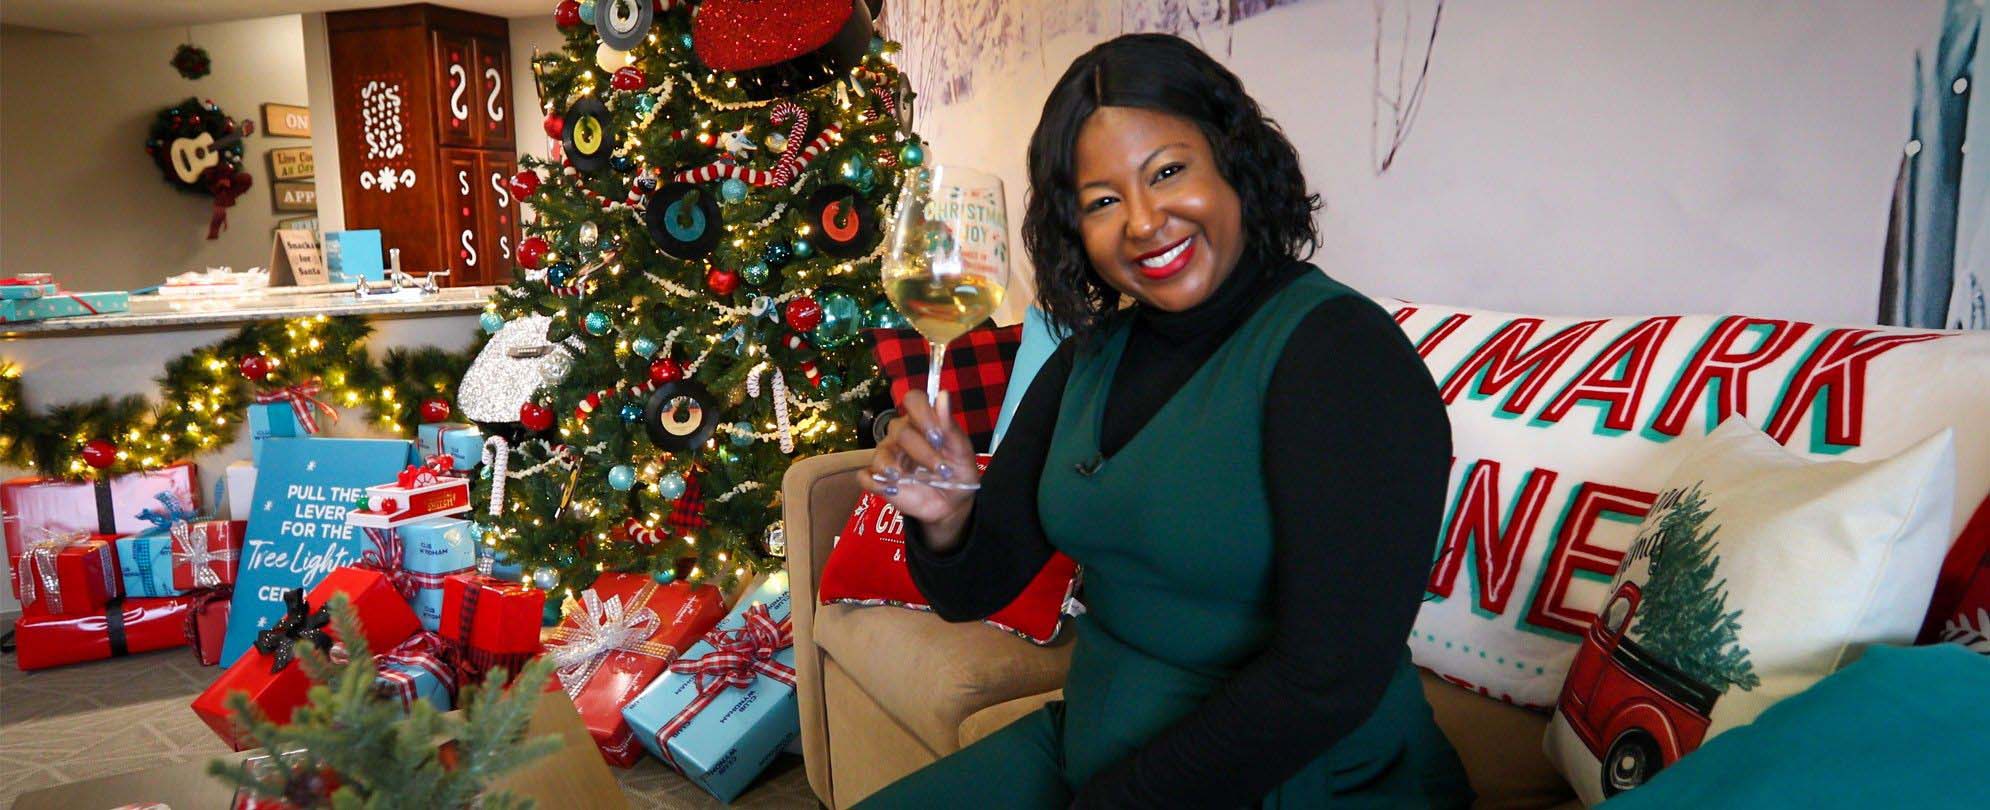 Melody holds up a glass of white wine on the couch in front of a Christmas tree in the Hallmark Channel’s Countdown to Christmas Holiday Suite by Club Wyndham at Club Wyndham Nashville